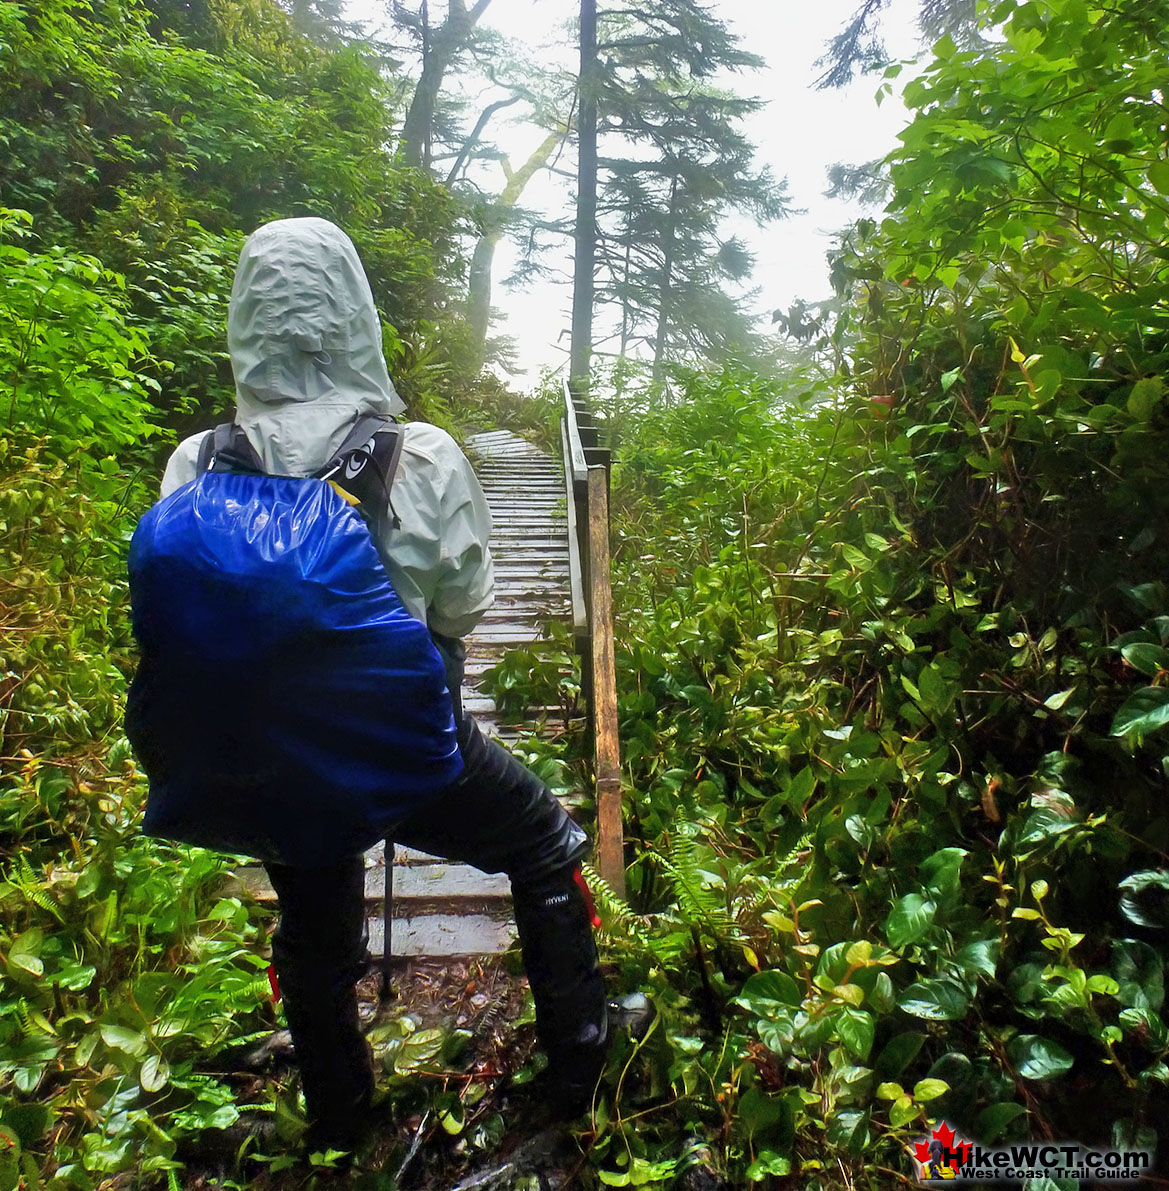 Best West Coast Trail Sights Ladders